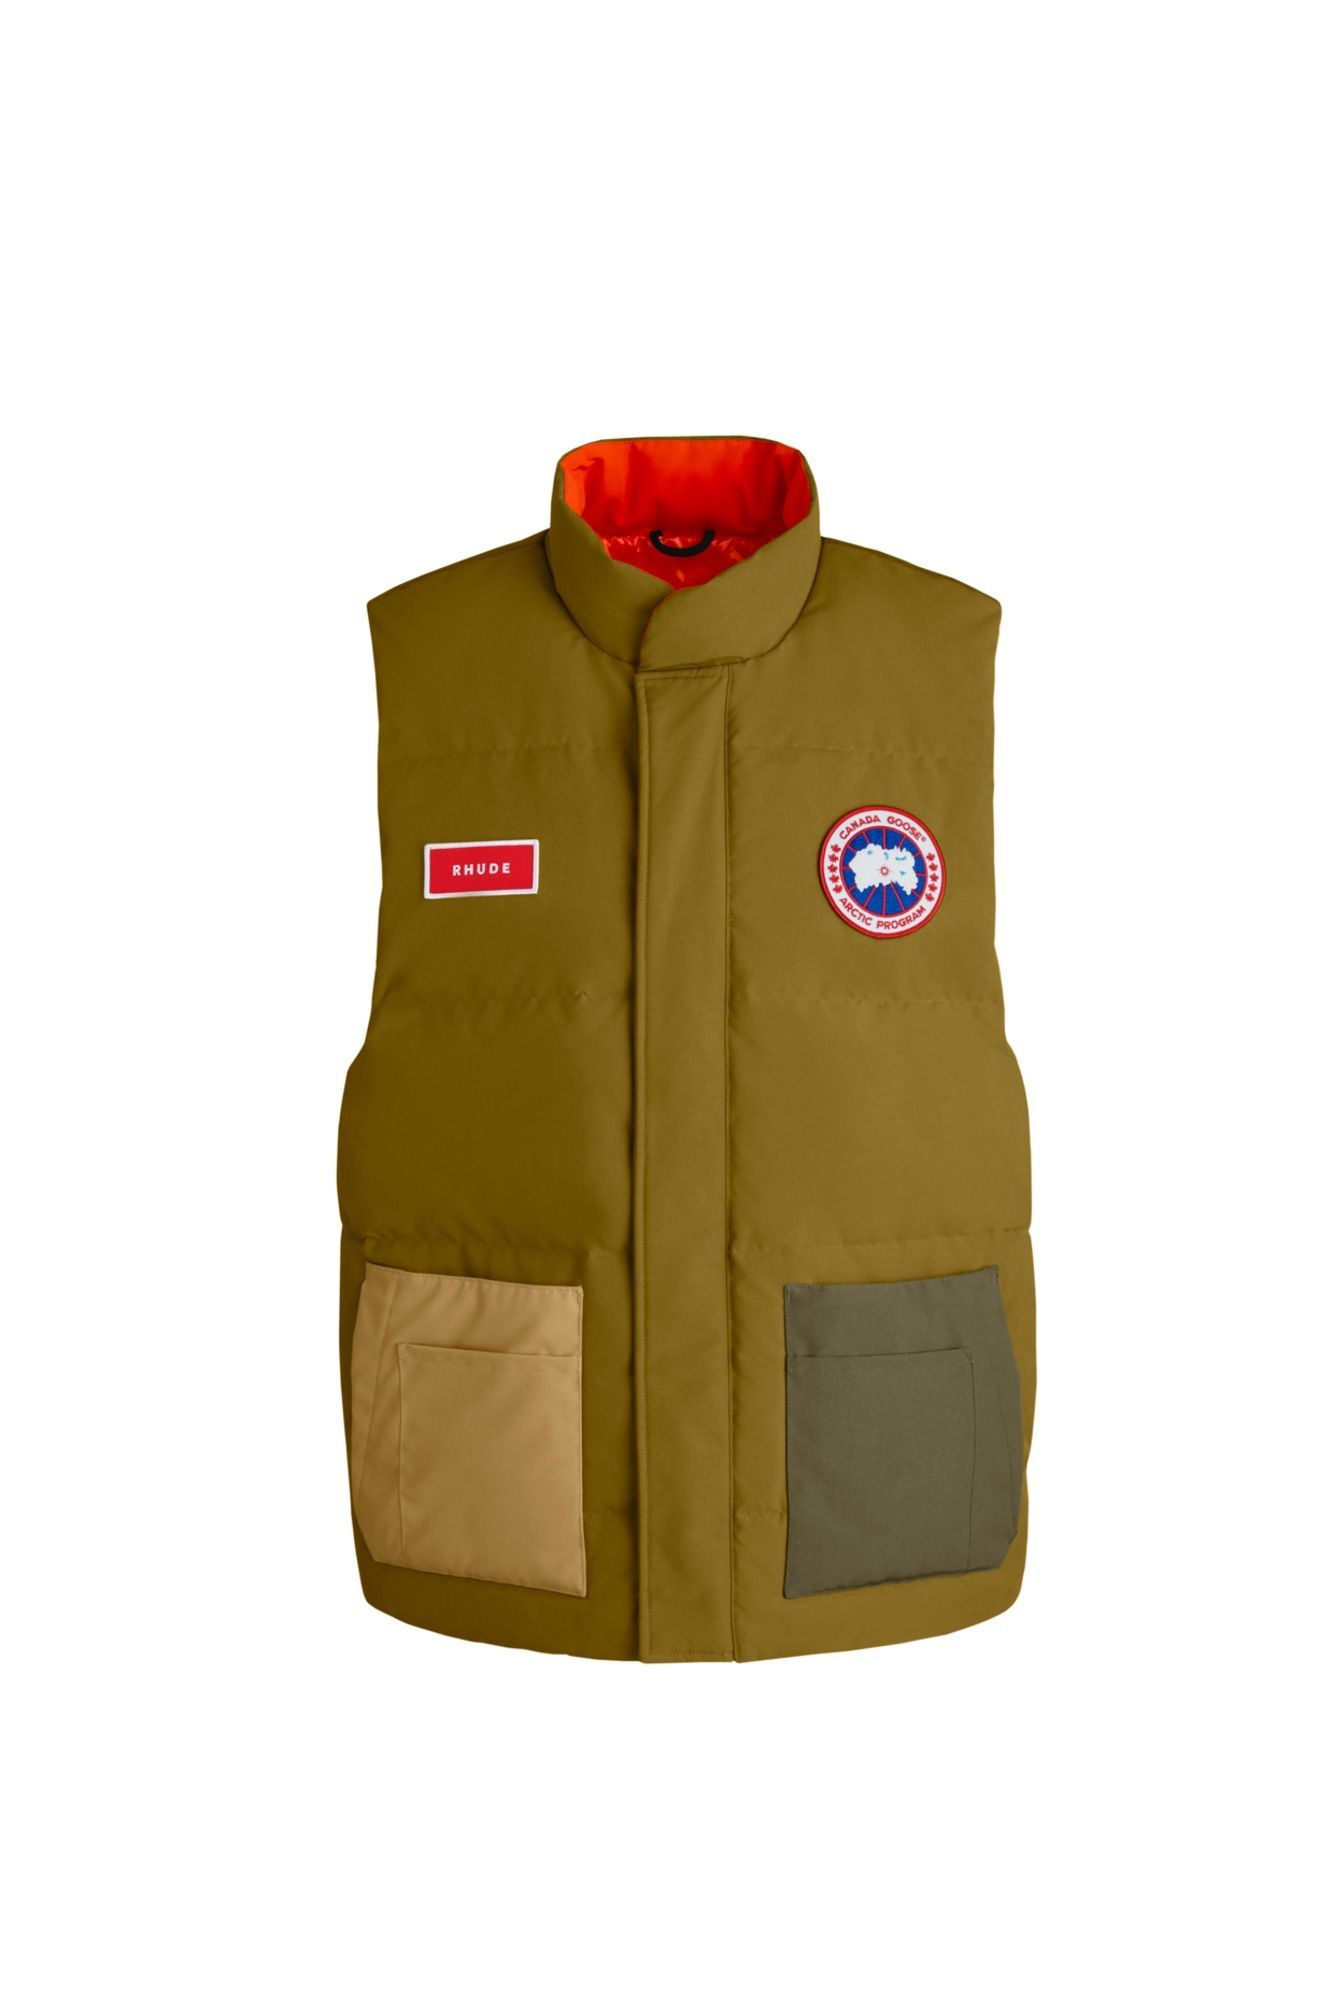 Freestyle Vest by Rhude